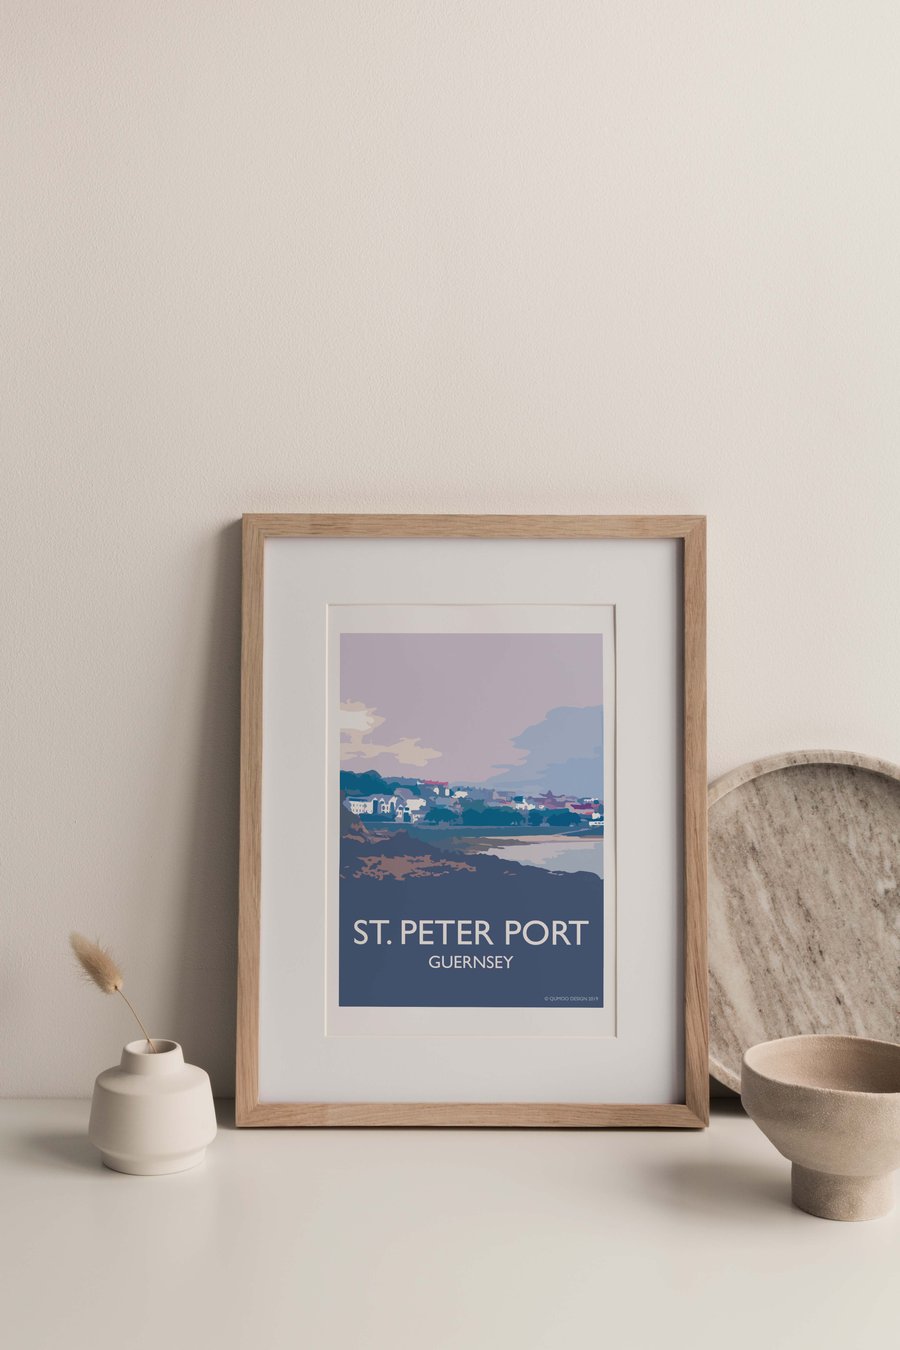 St. Peter Port seascape Guernsey Channel Islands Giclee Travel Poster